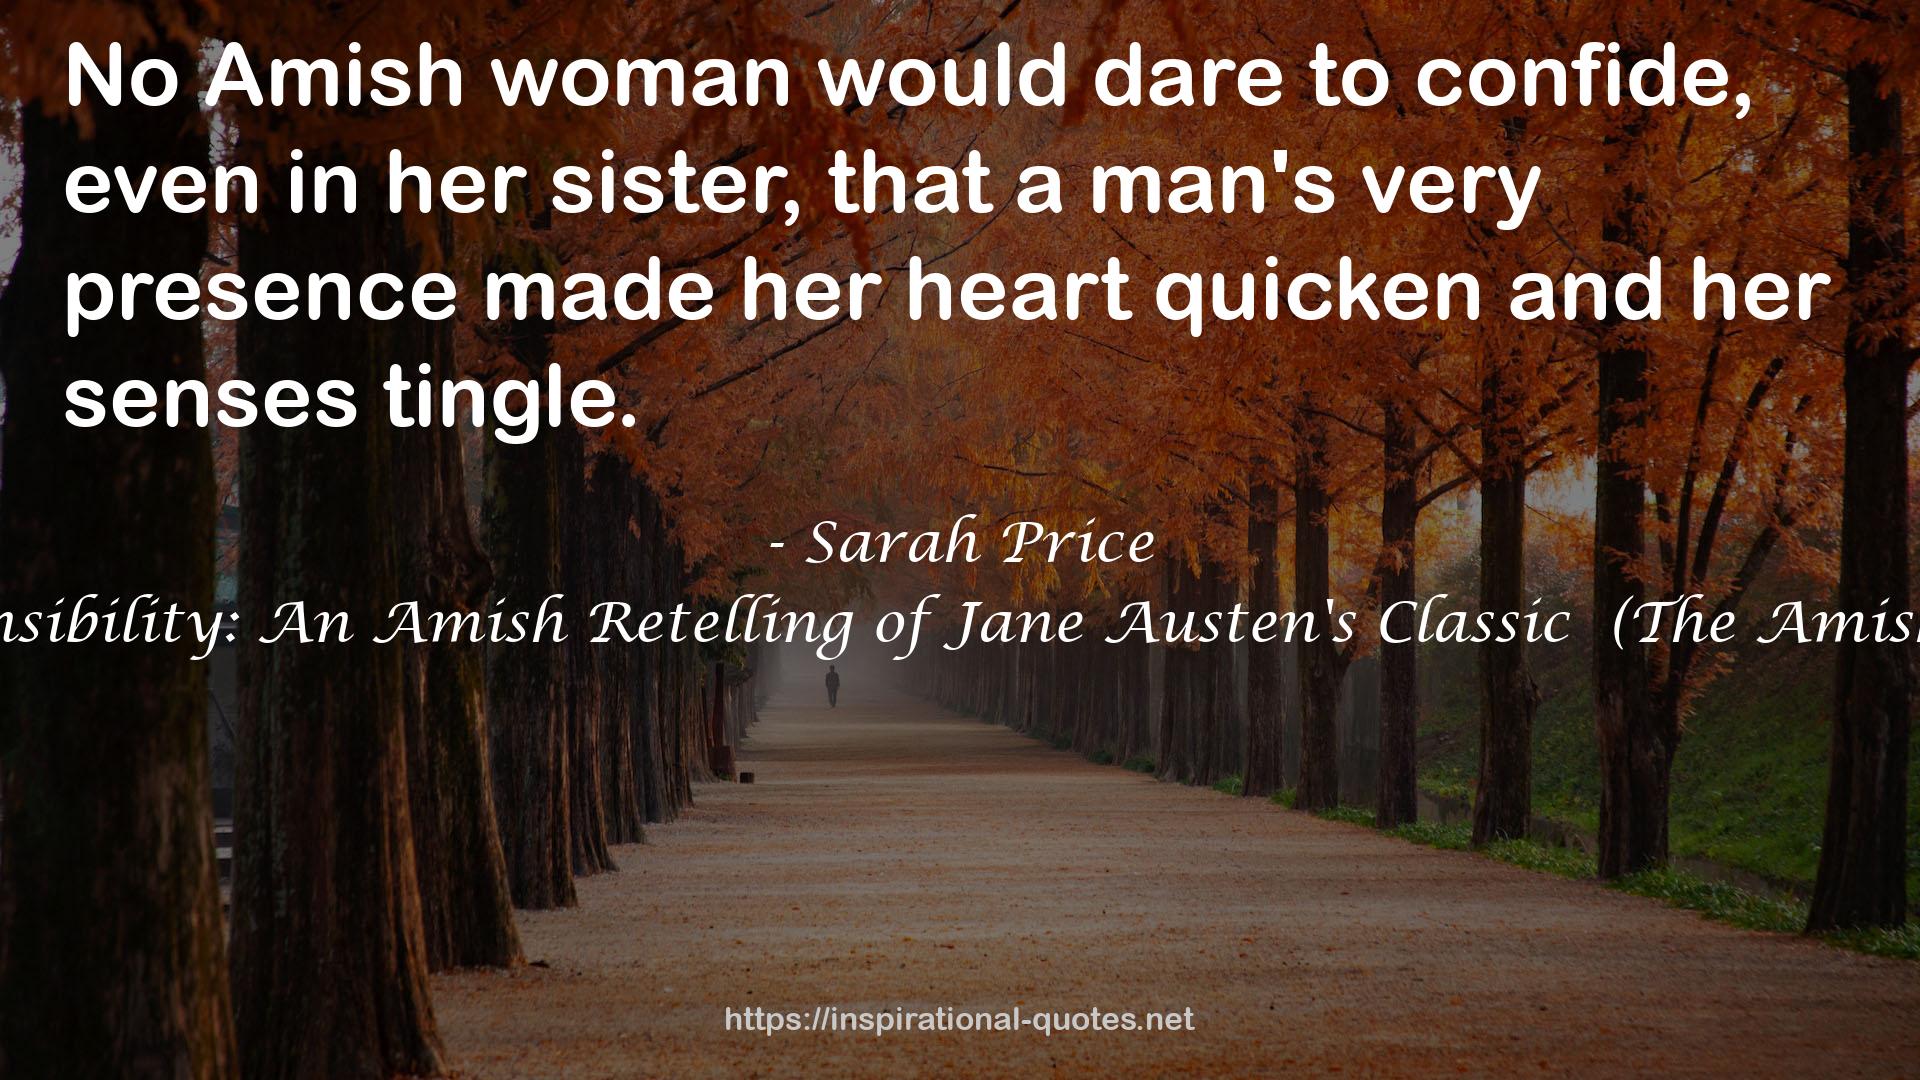 Sense and Sensibility: An Amish Retelling of Jane Austen's Classic  (The Amish Classics, #4) QUOTES